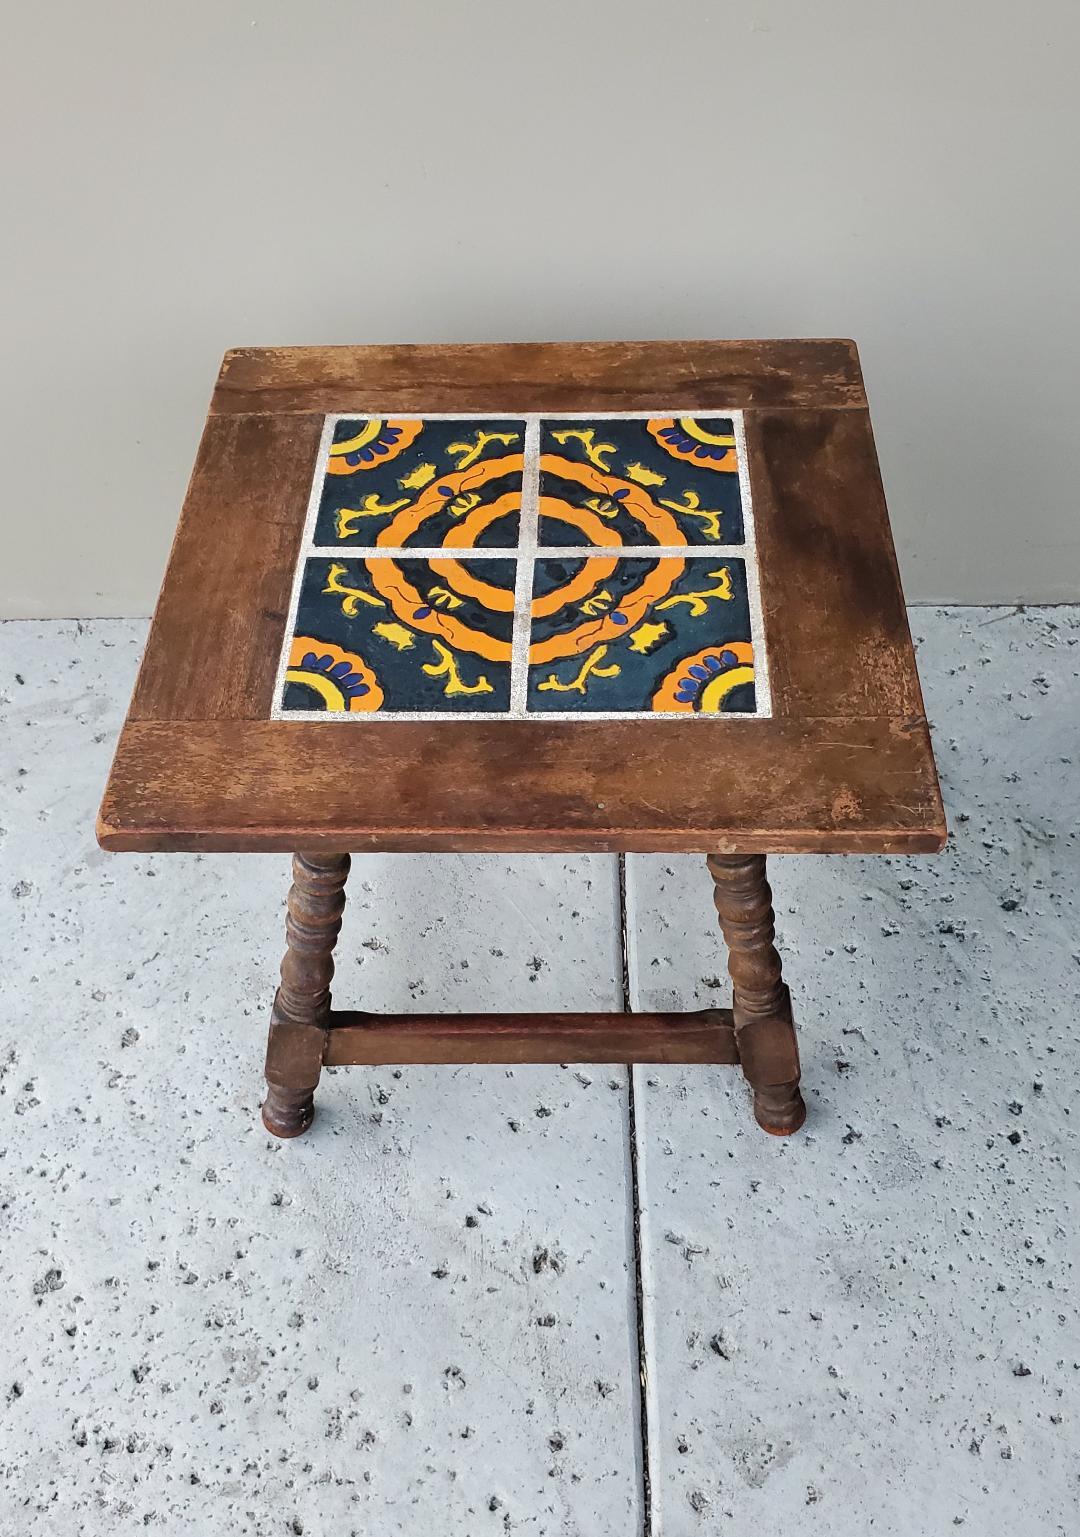 Ceramic Early 20th Century Catalina Tile Table Mission Craftsman Arts & Craft Spanish  For Sale